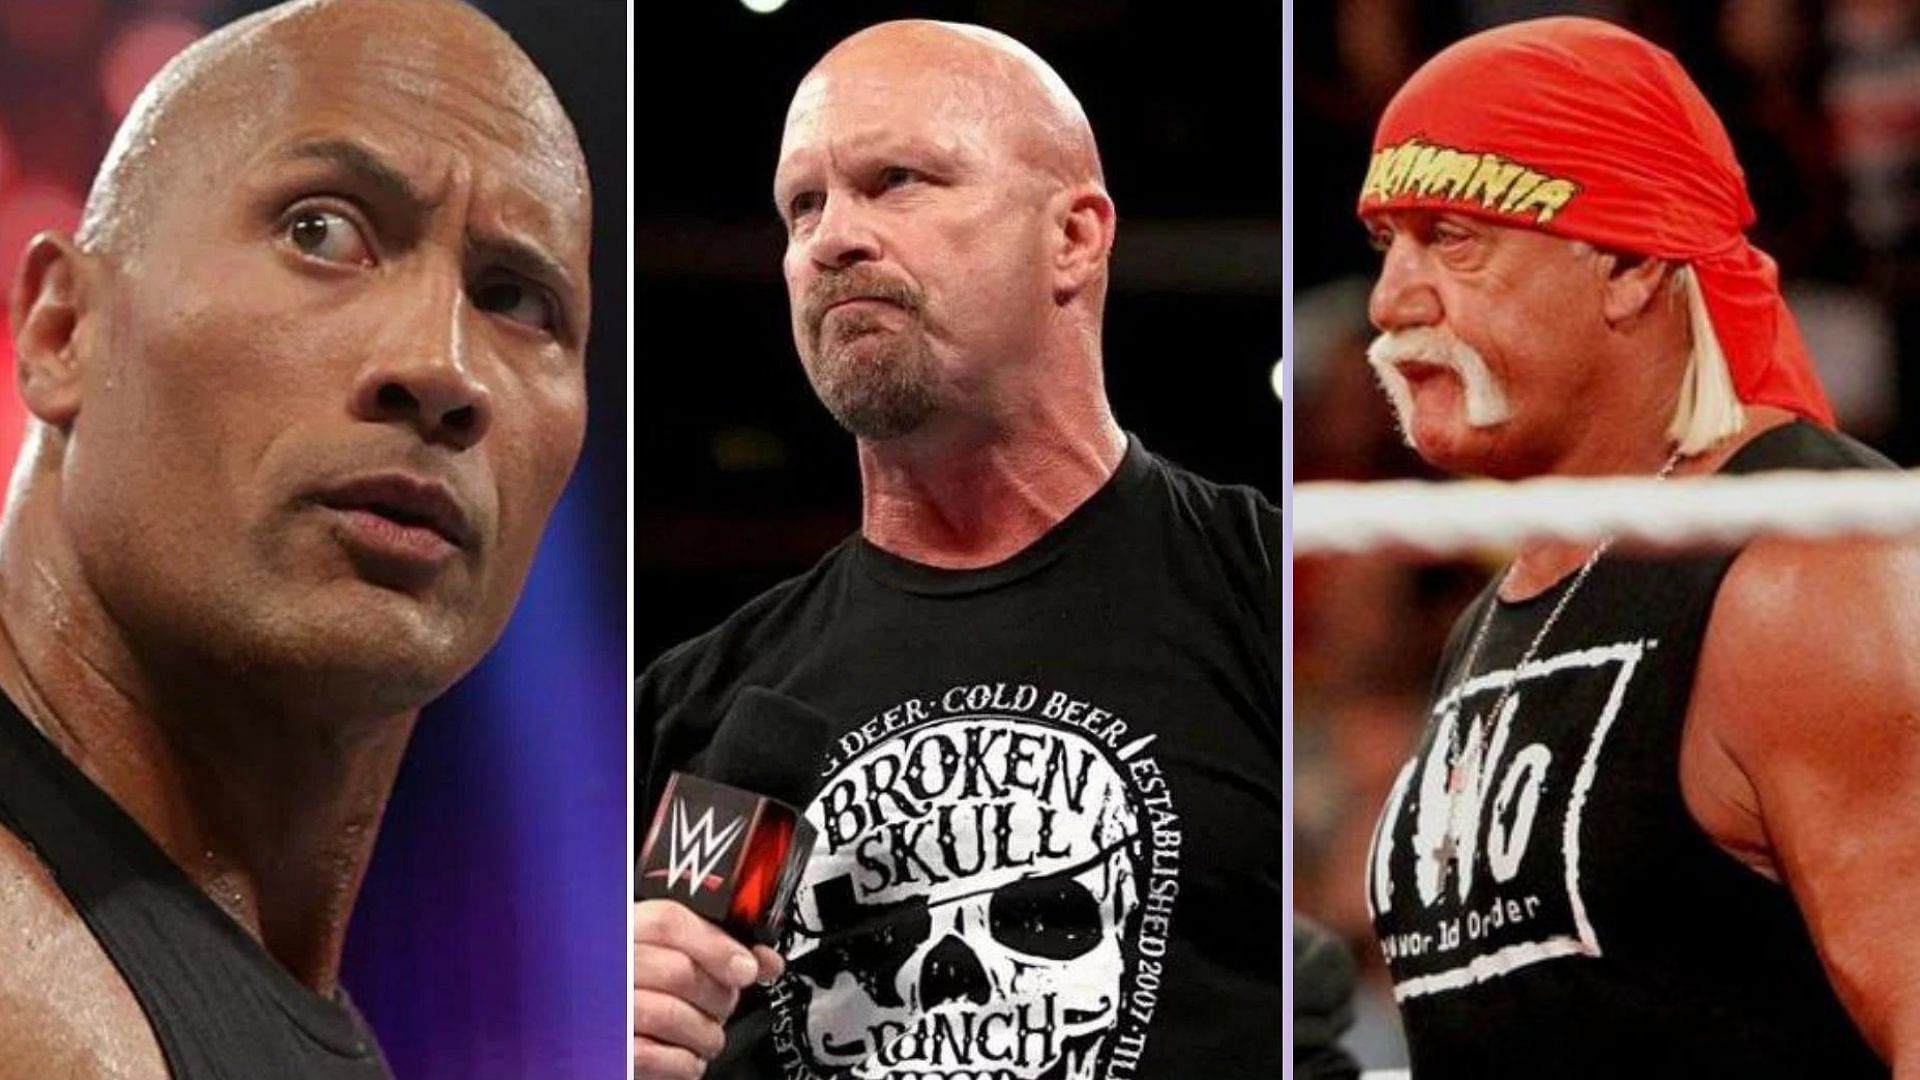 The Rock on the left, Steve Austin in the middle, Hulk Hogan on the right